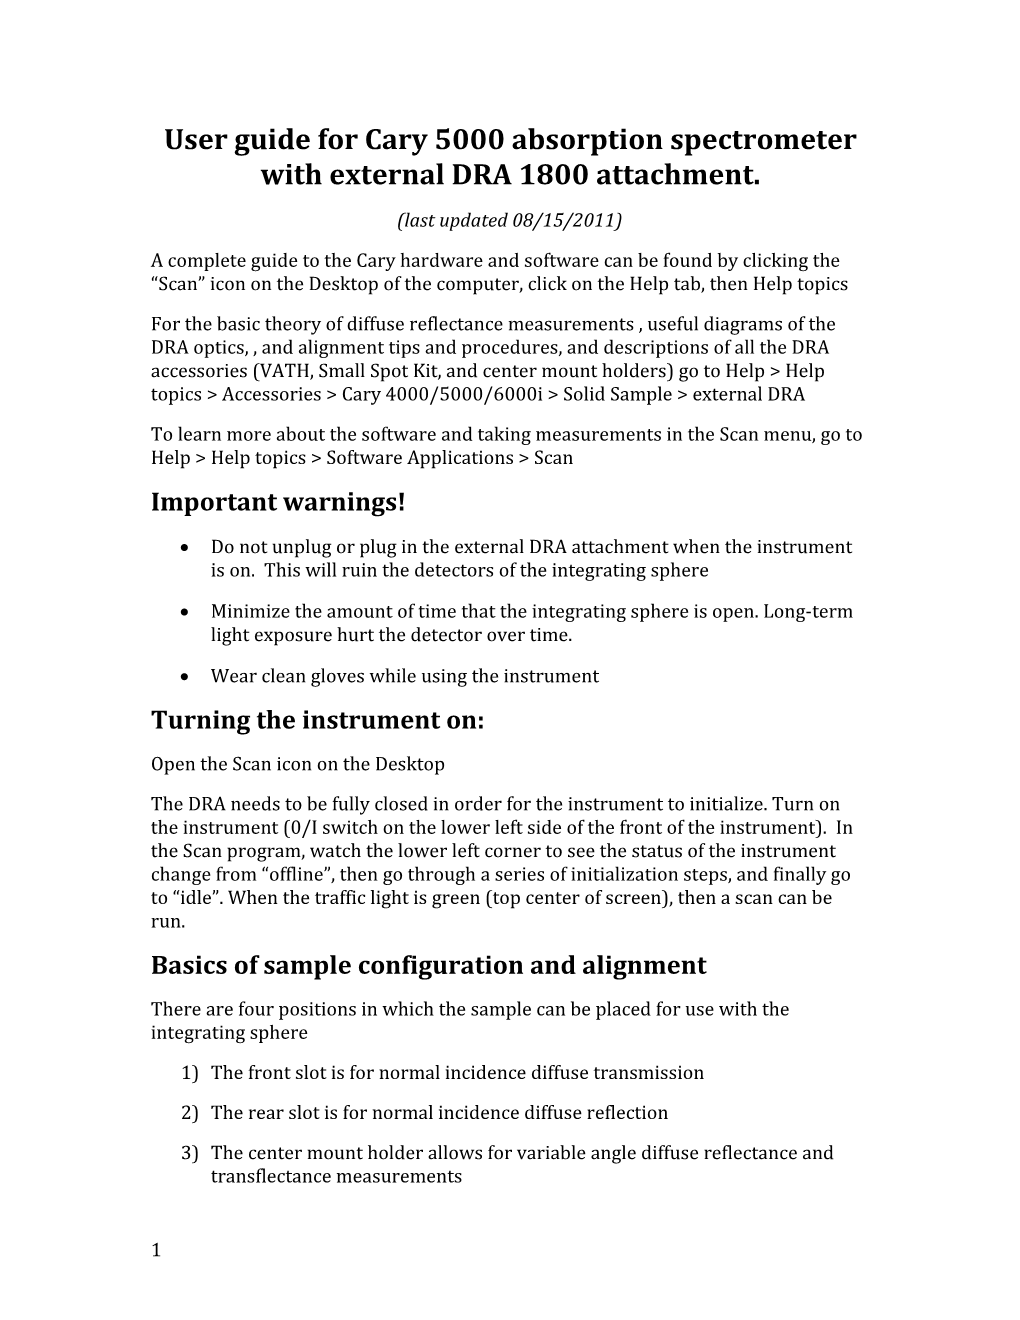 User Guide for Cary 5000 Absorption Spectrometer with External DRA 1800 Attachment